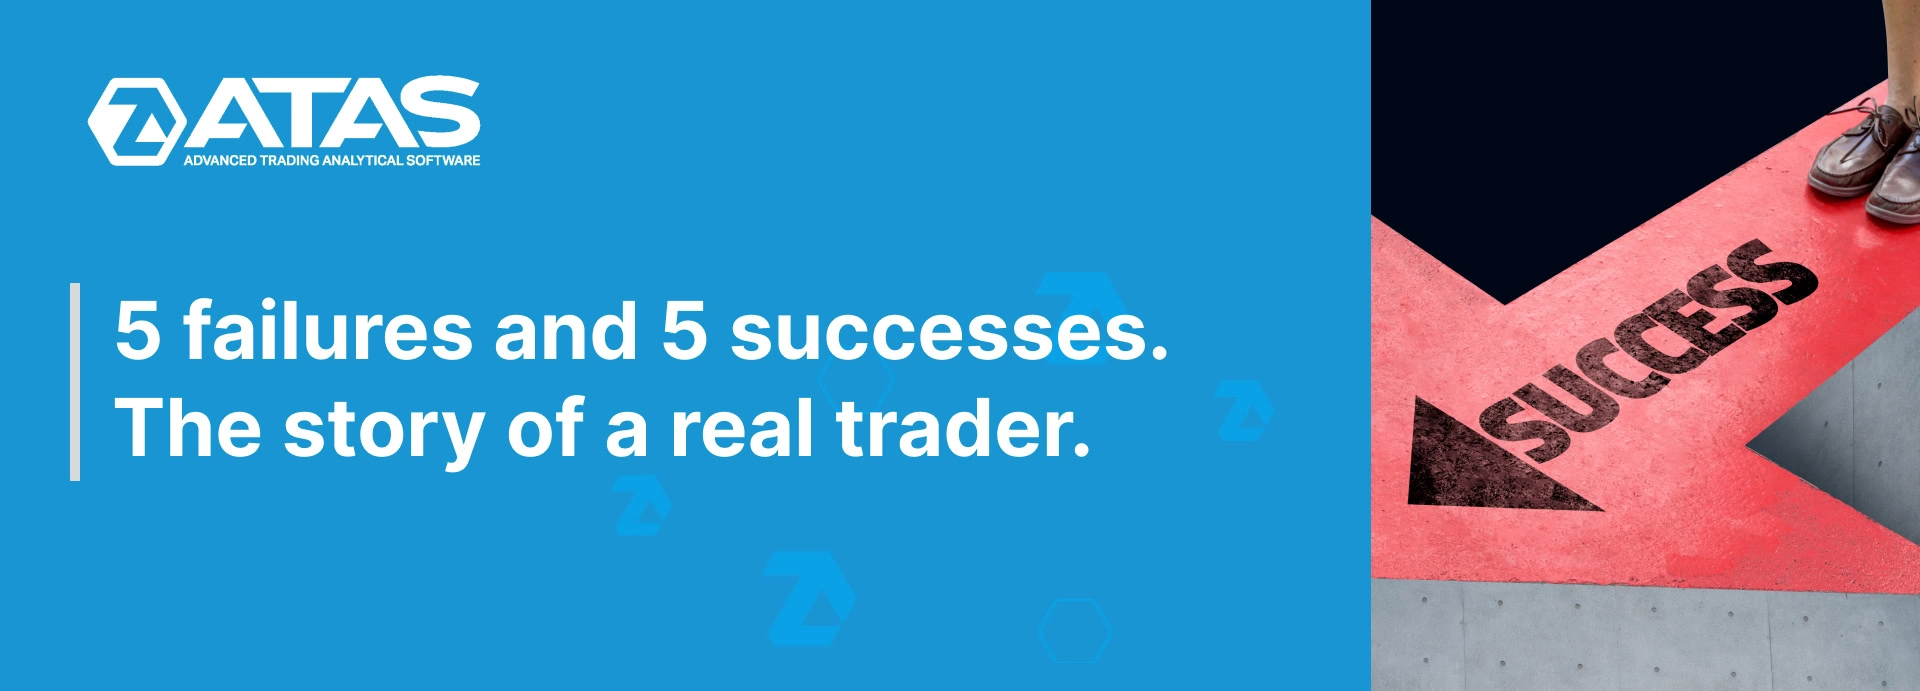 5 failures and 5 successes. The story of a real trader.